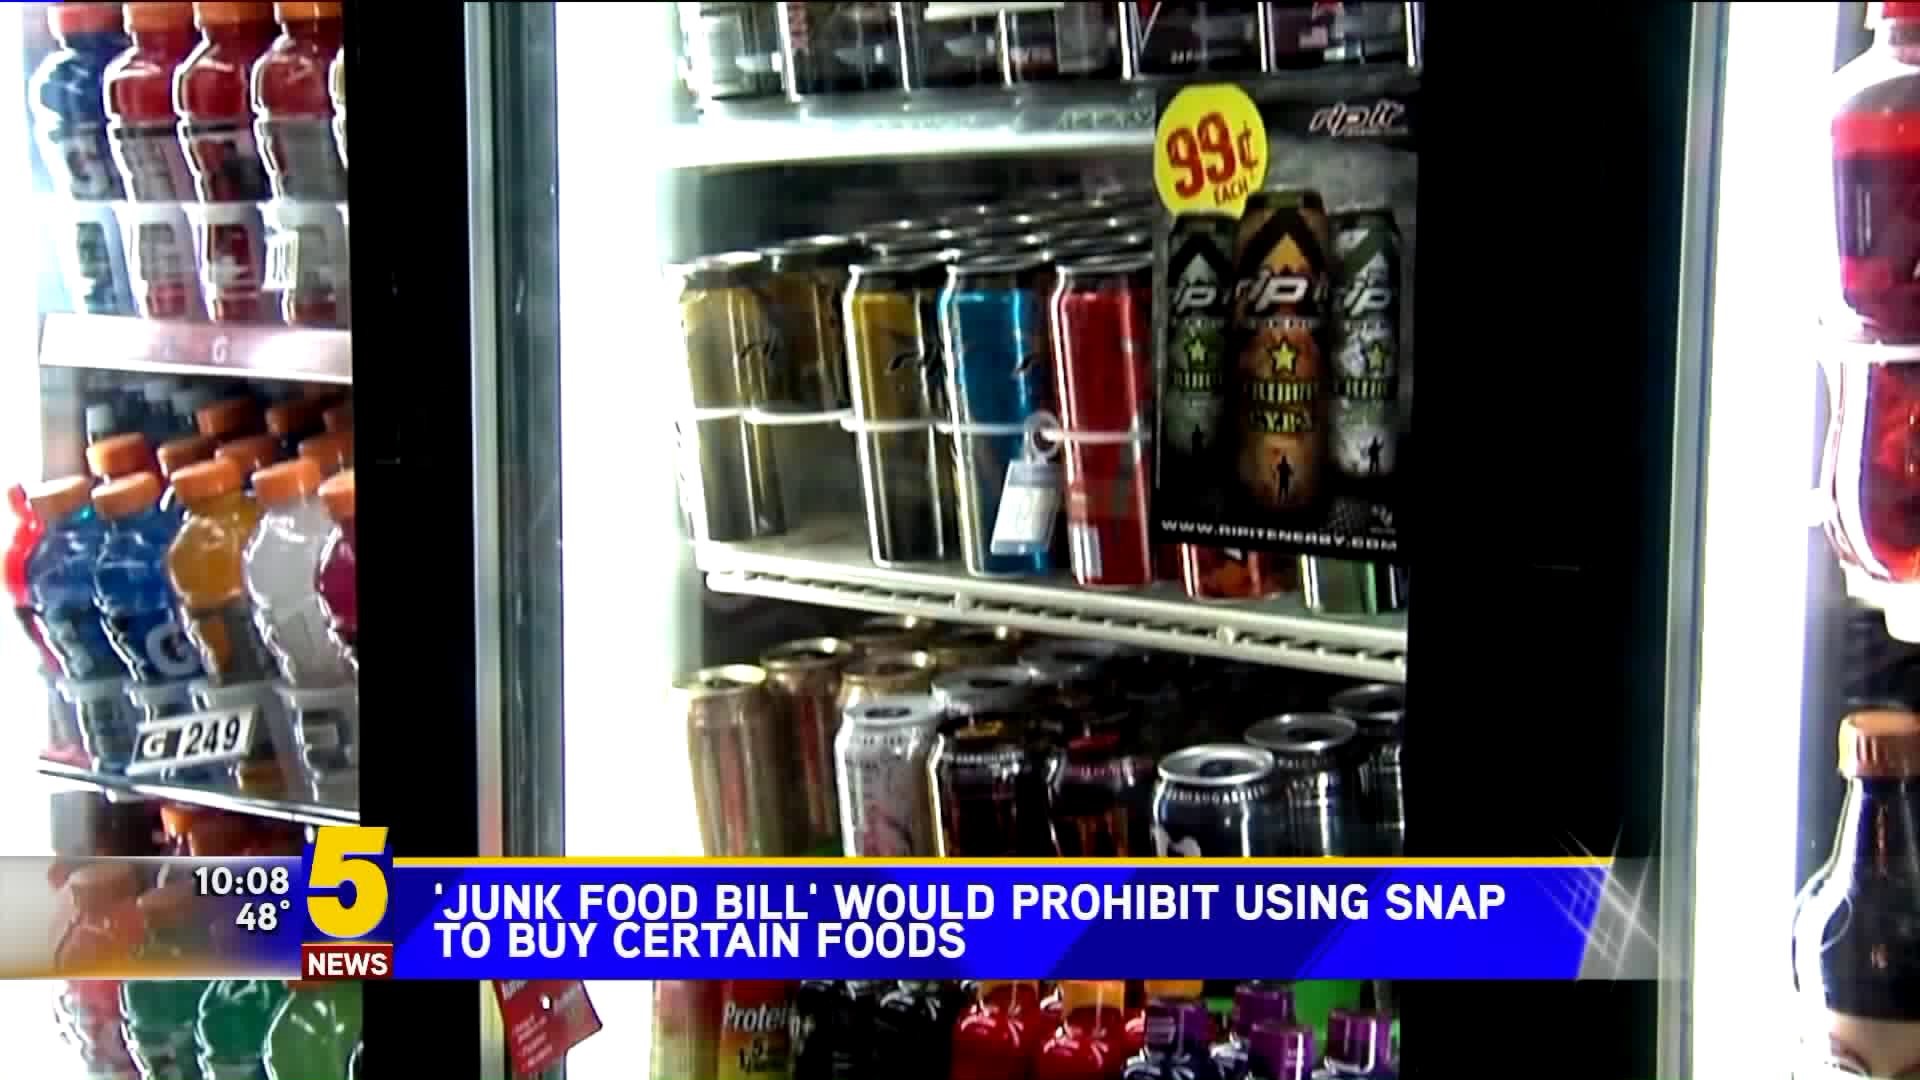 Junk Food Bill Would Prohibit Using SNAP To Buy Certain Foods